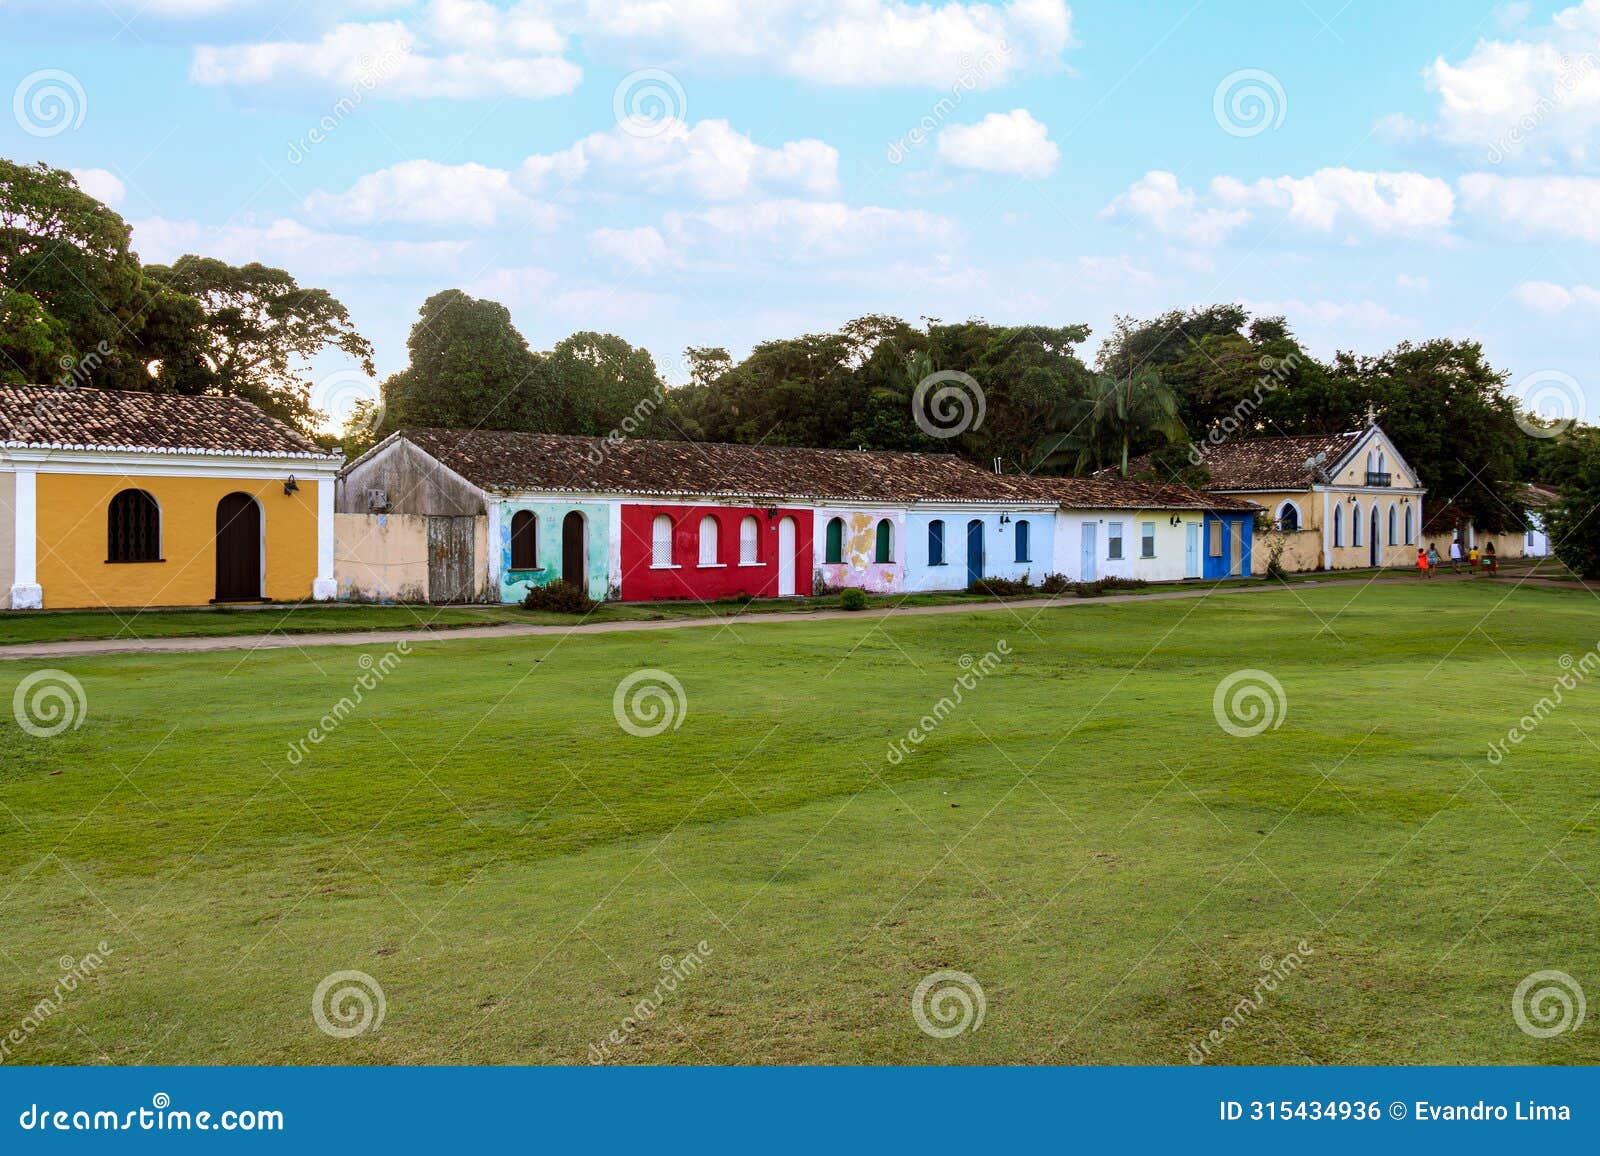 historic old houses in the historic center of the old town of porto seguro, in the state of bahia, brazil